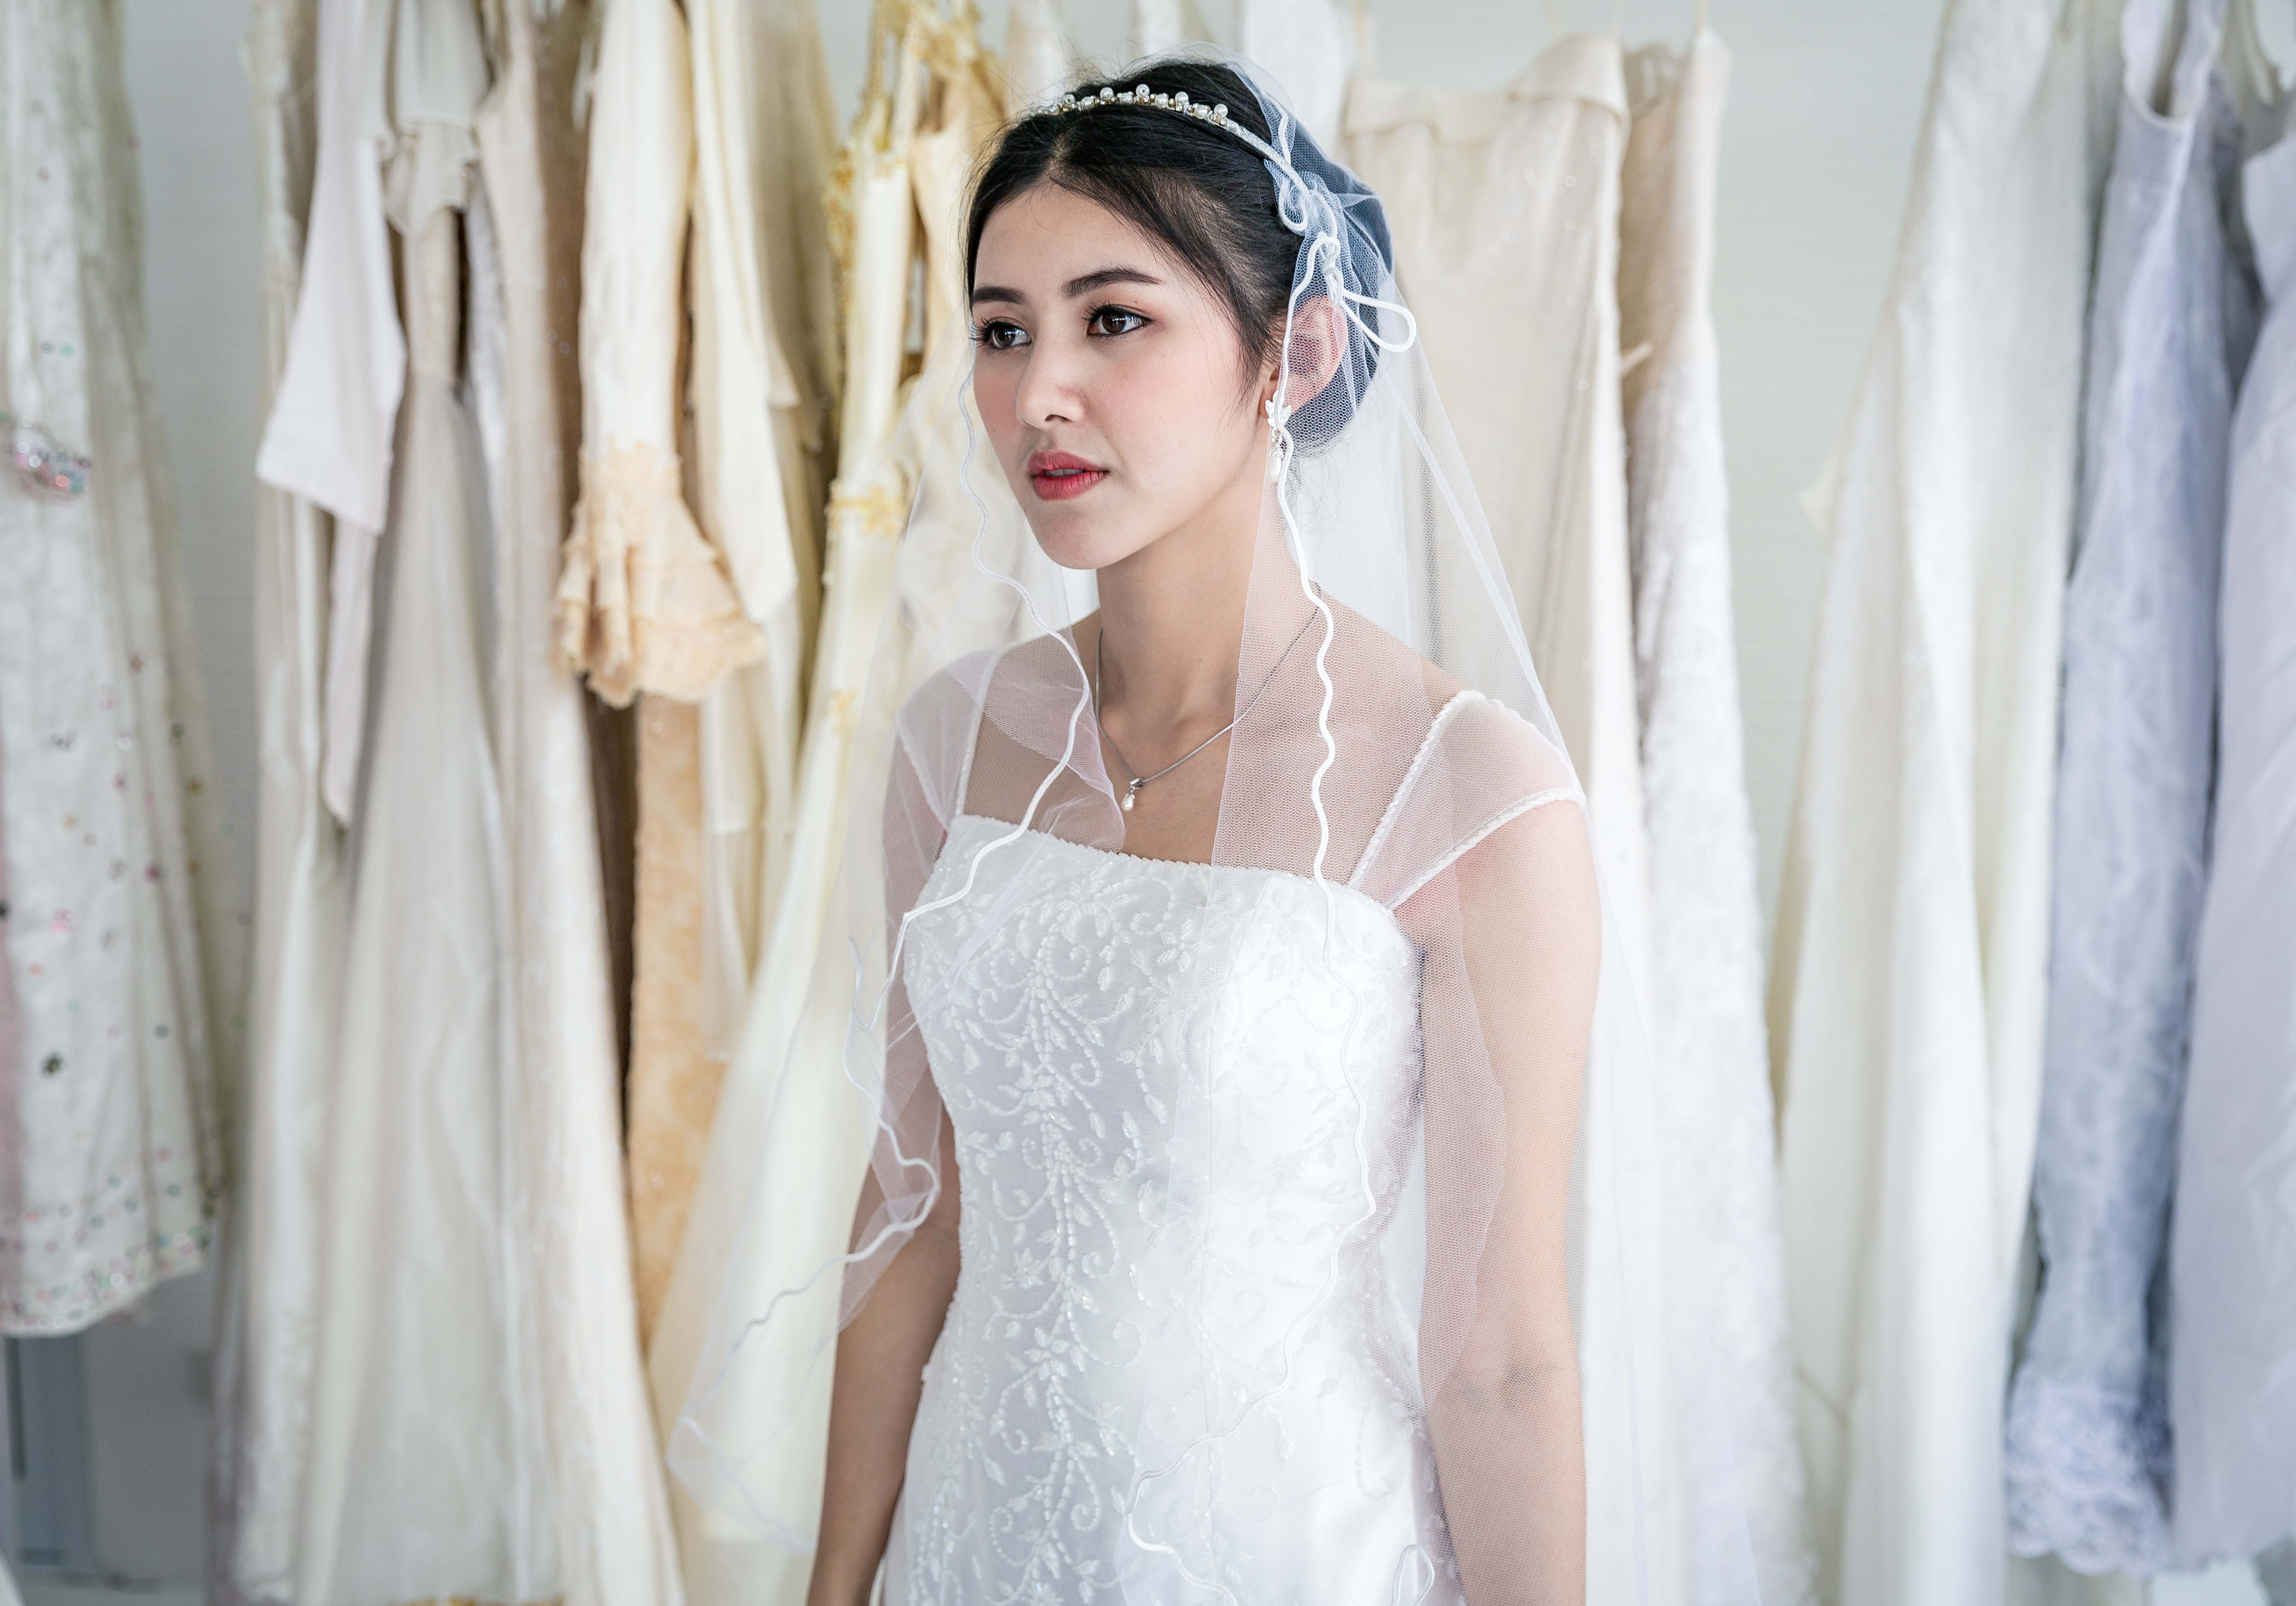 Beautiful bride woman standing with wedding dress in room | Source: Getty Images